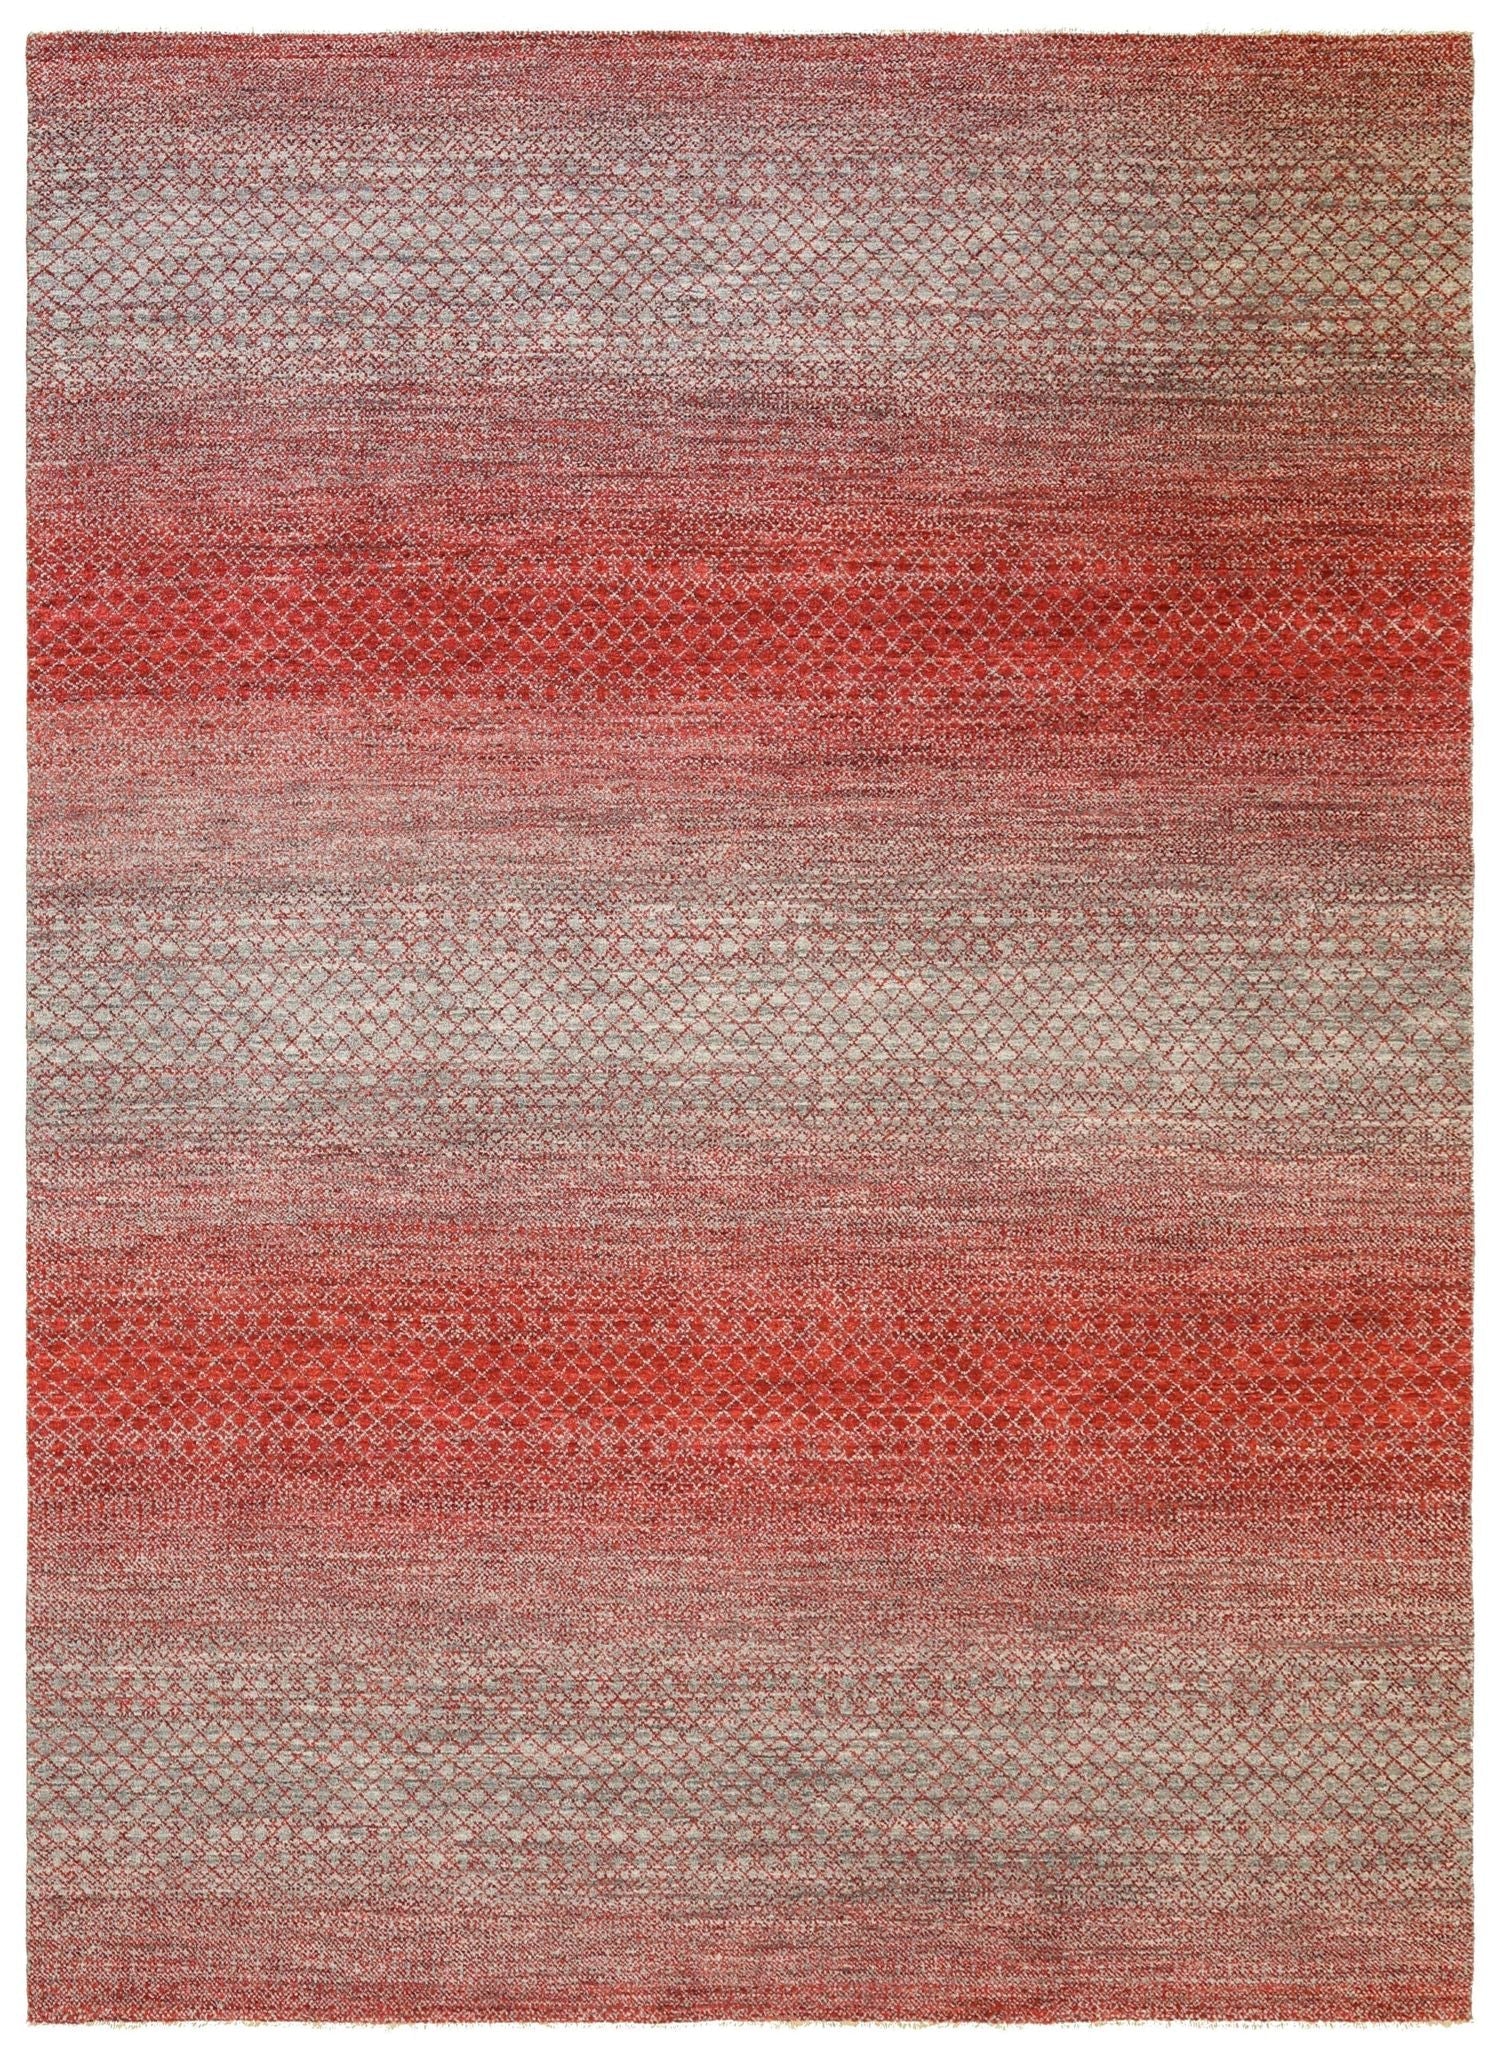 Sun And Sand Handwoven Contemporary Rug